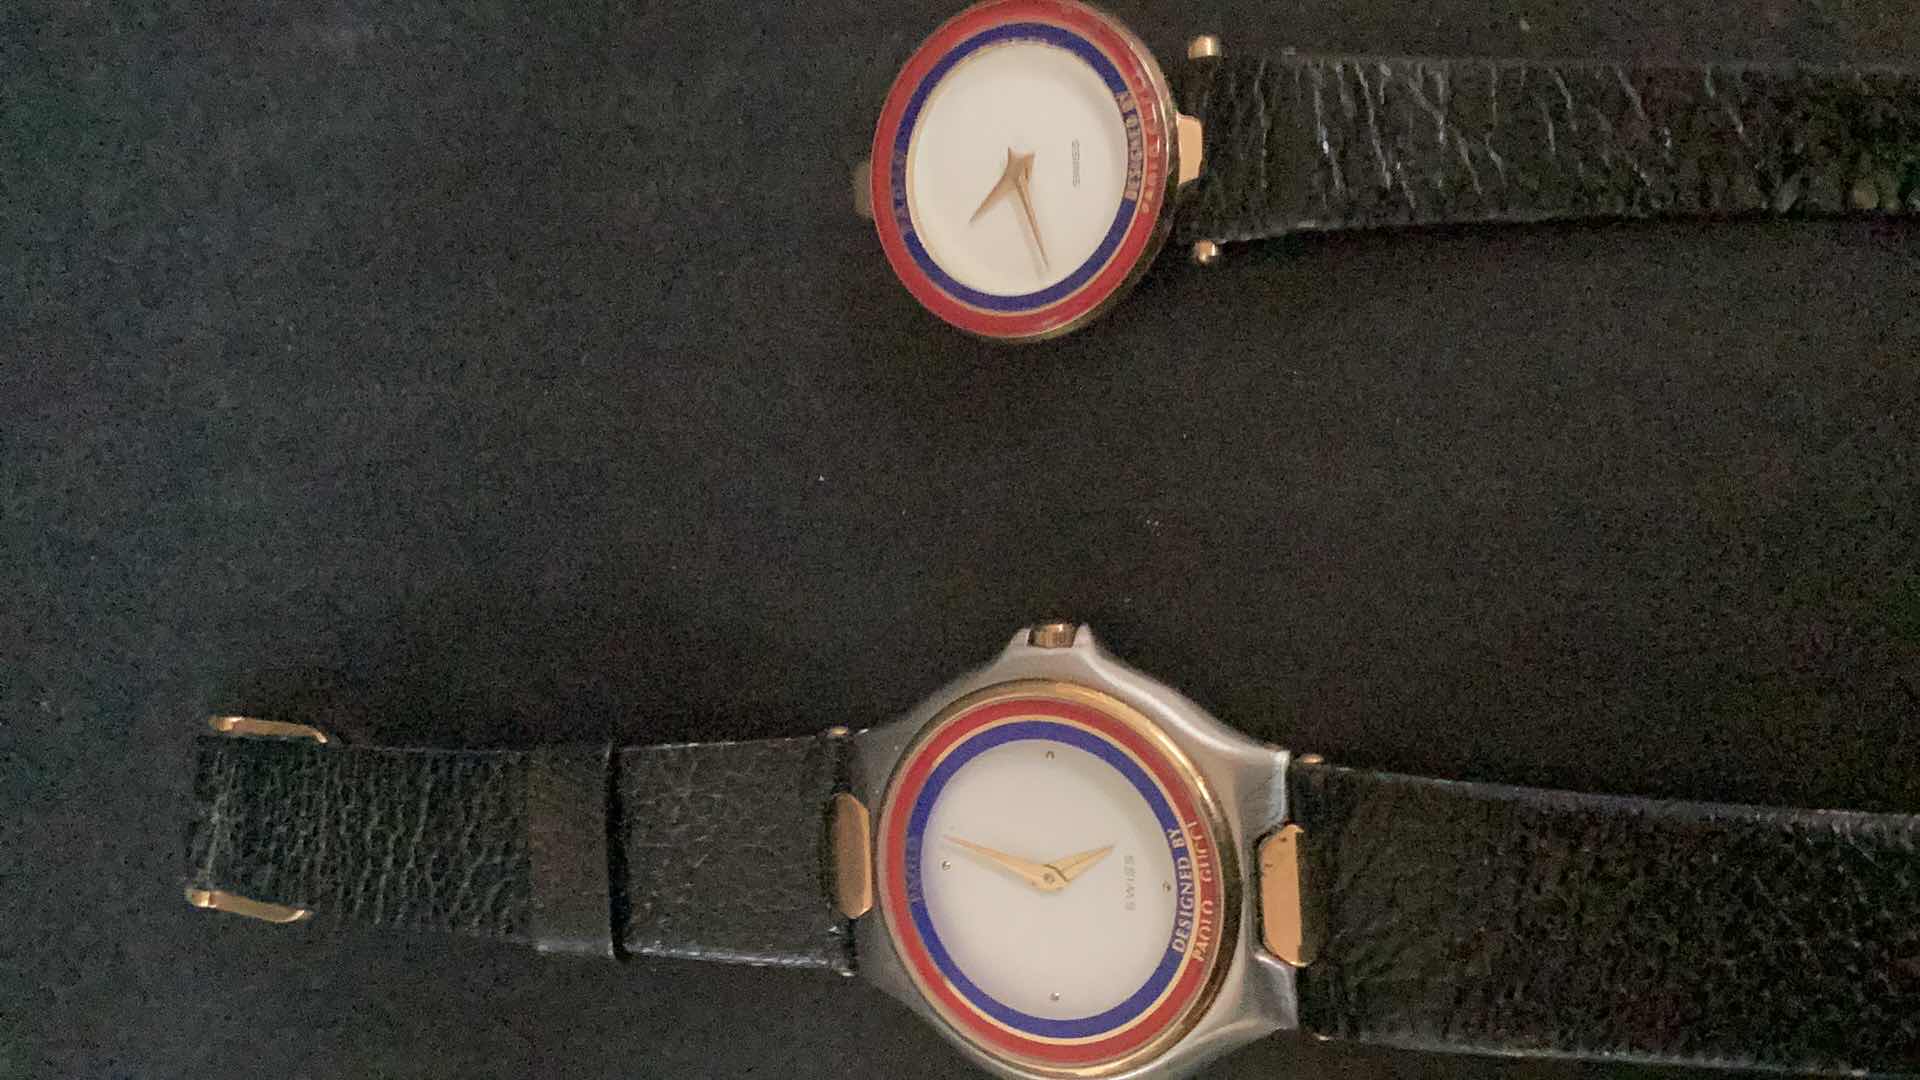 Photo 2 of 2 PAOLA GUCCI AND 1 GUCCI WATCH